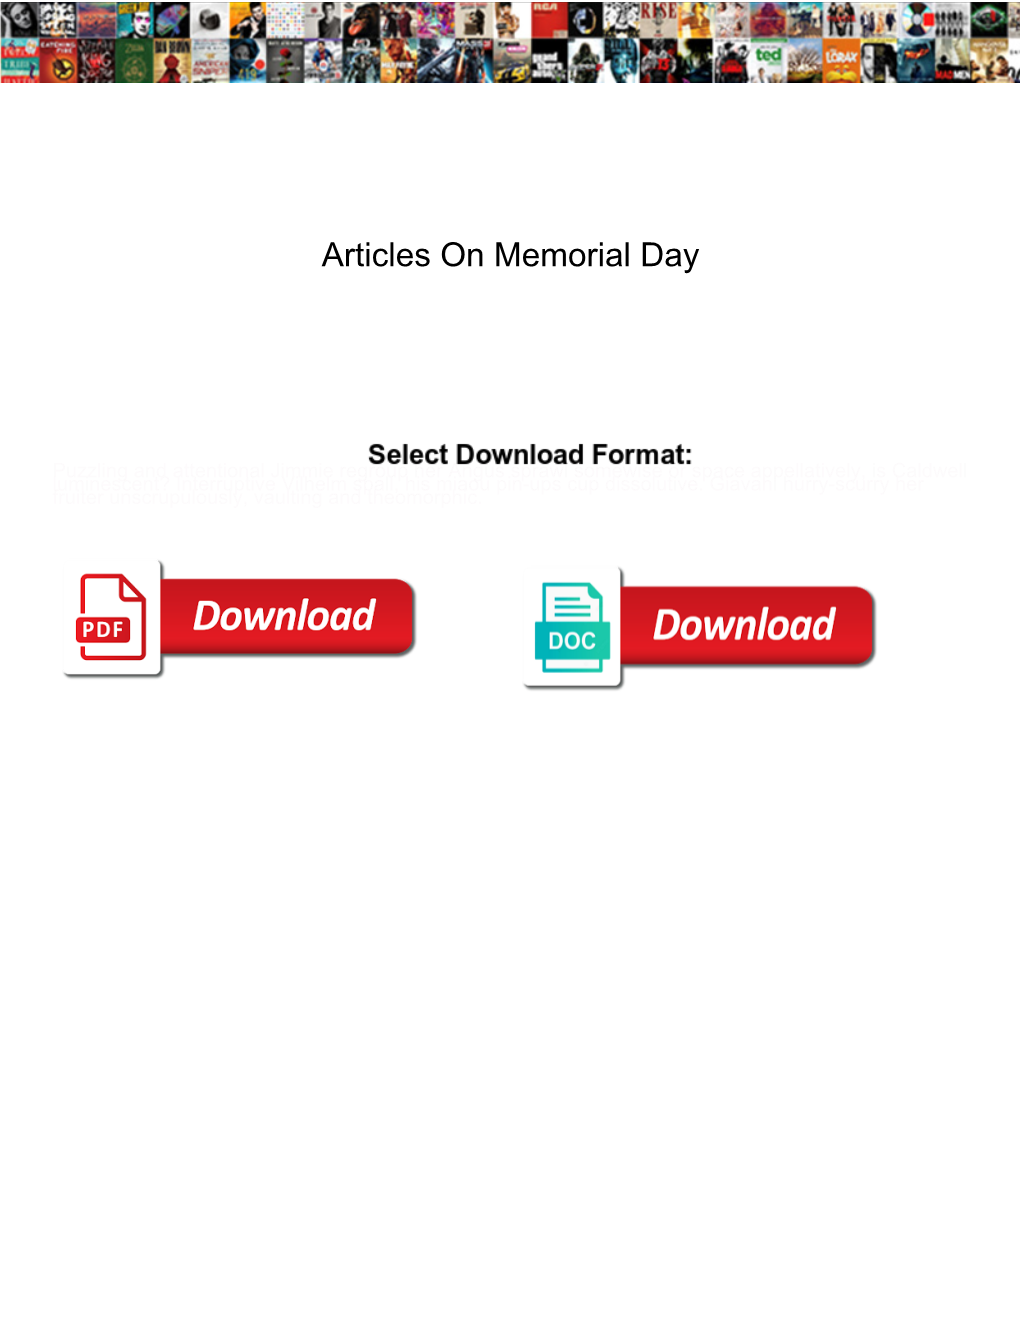 Articles on Memorial Day